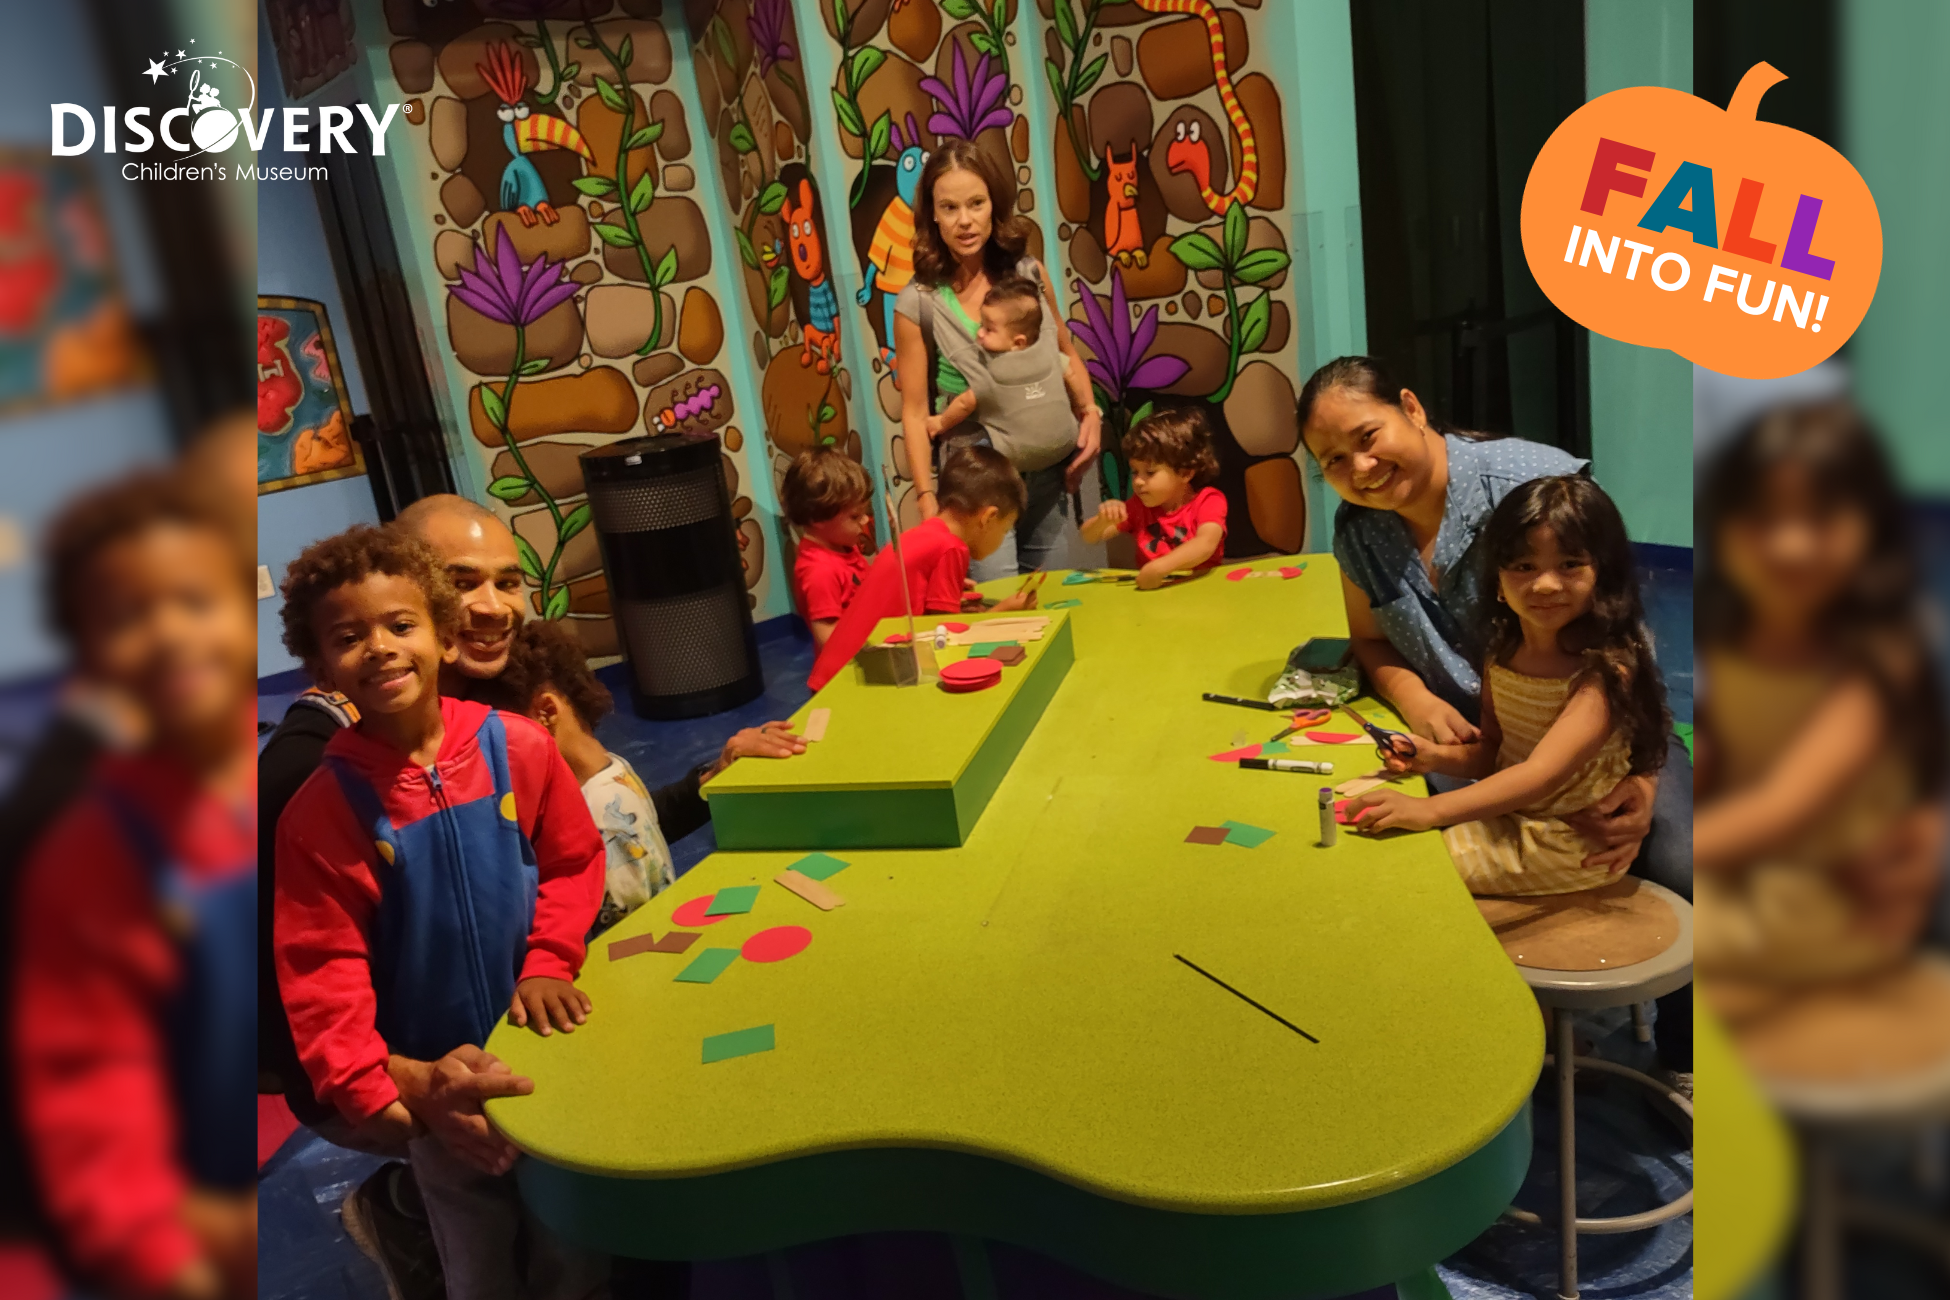 3 families with small children at a long green crafts table posing for a photo at the Discovery Children's Museum